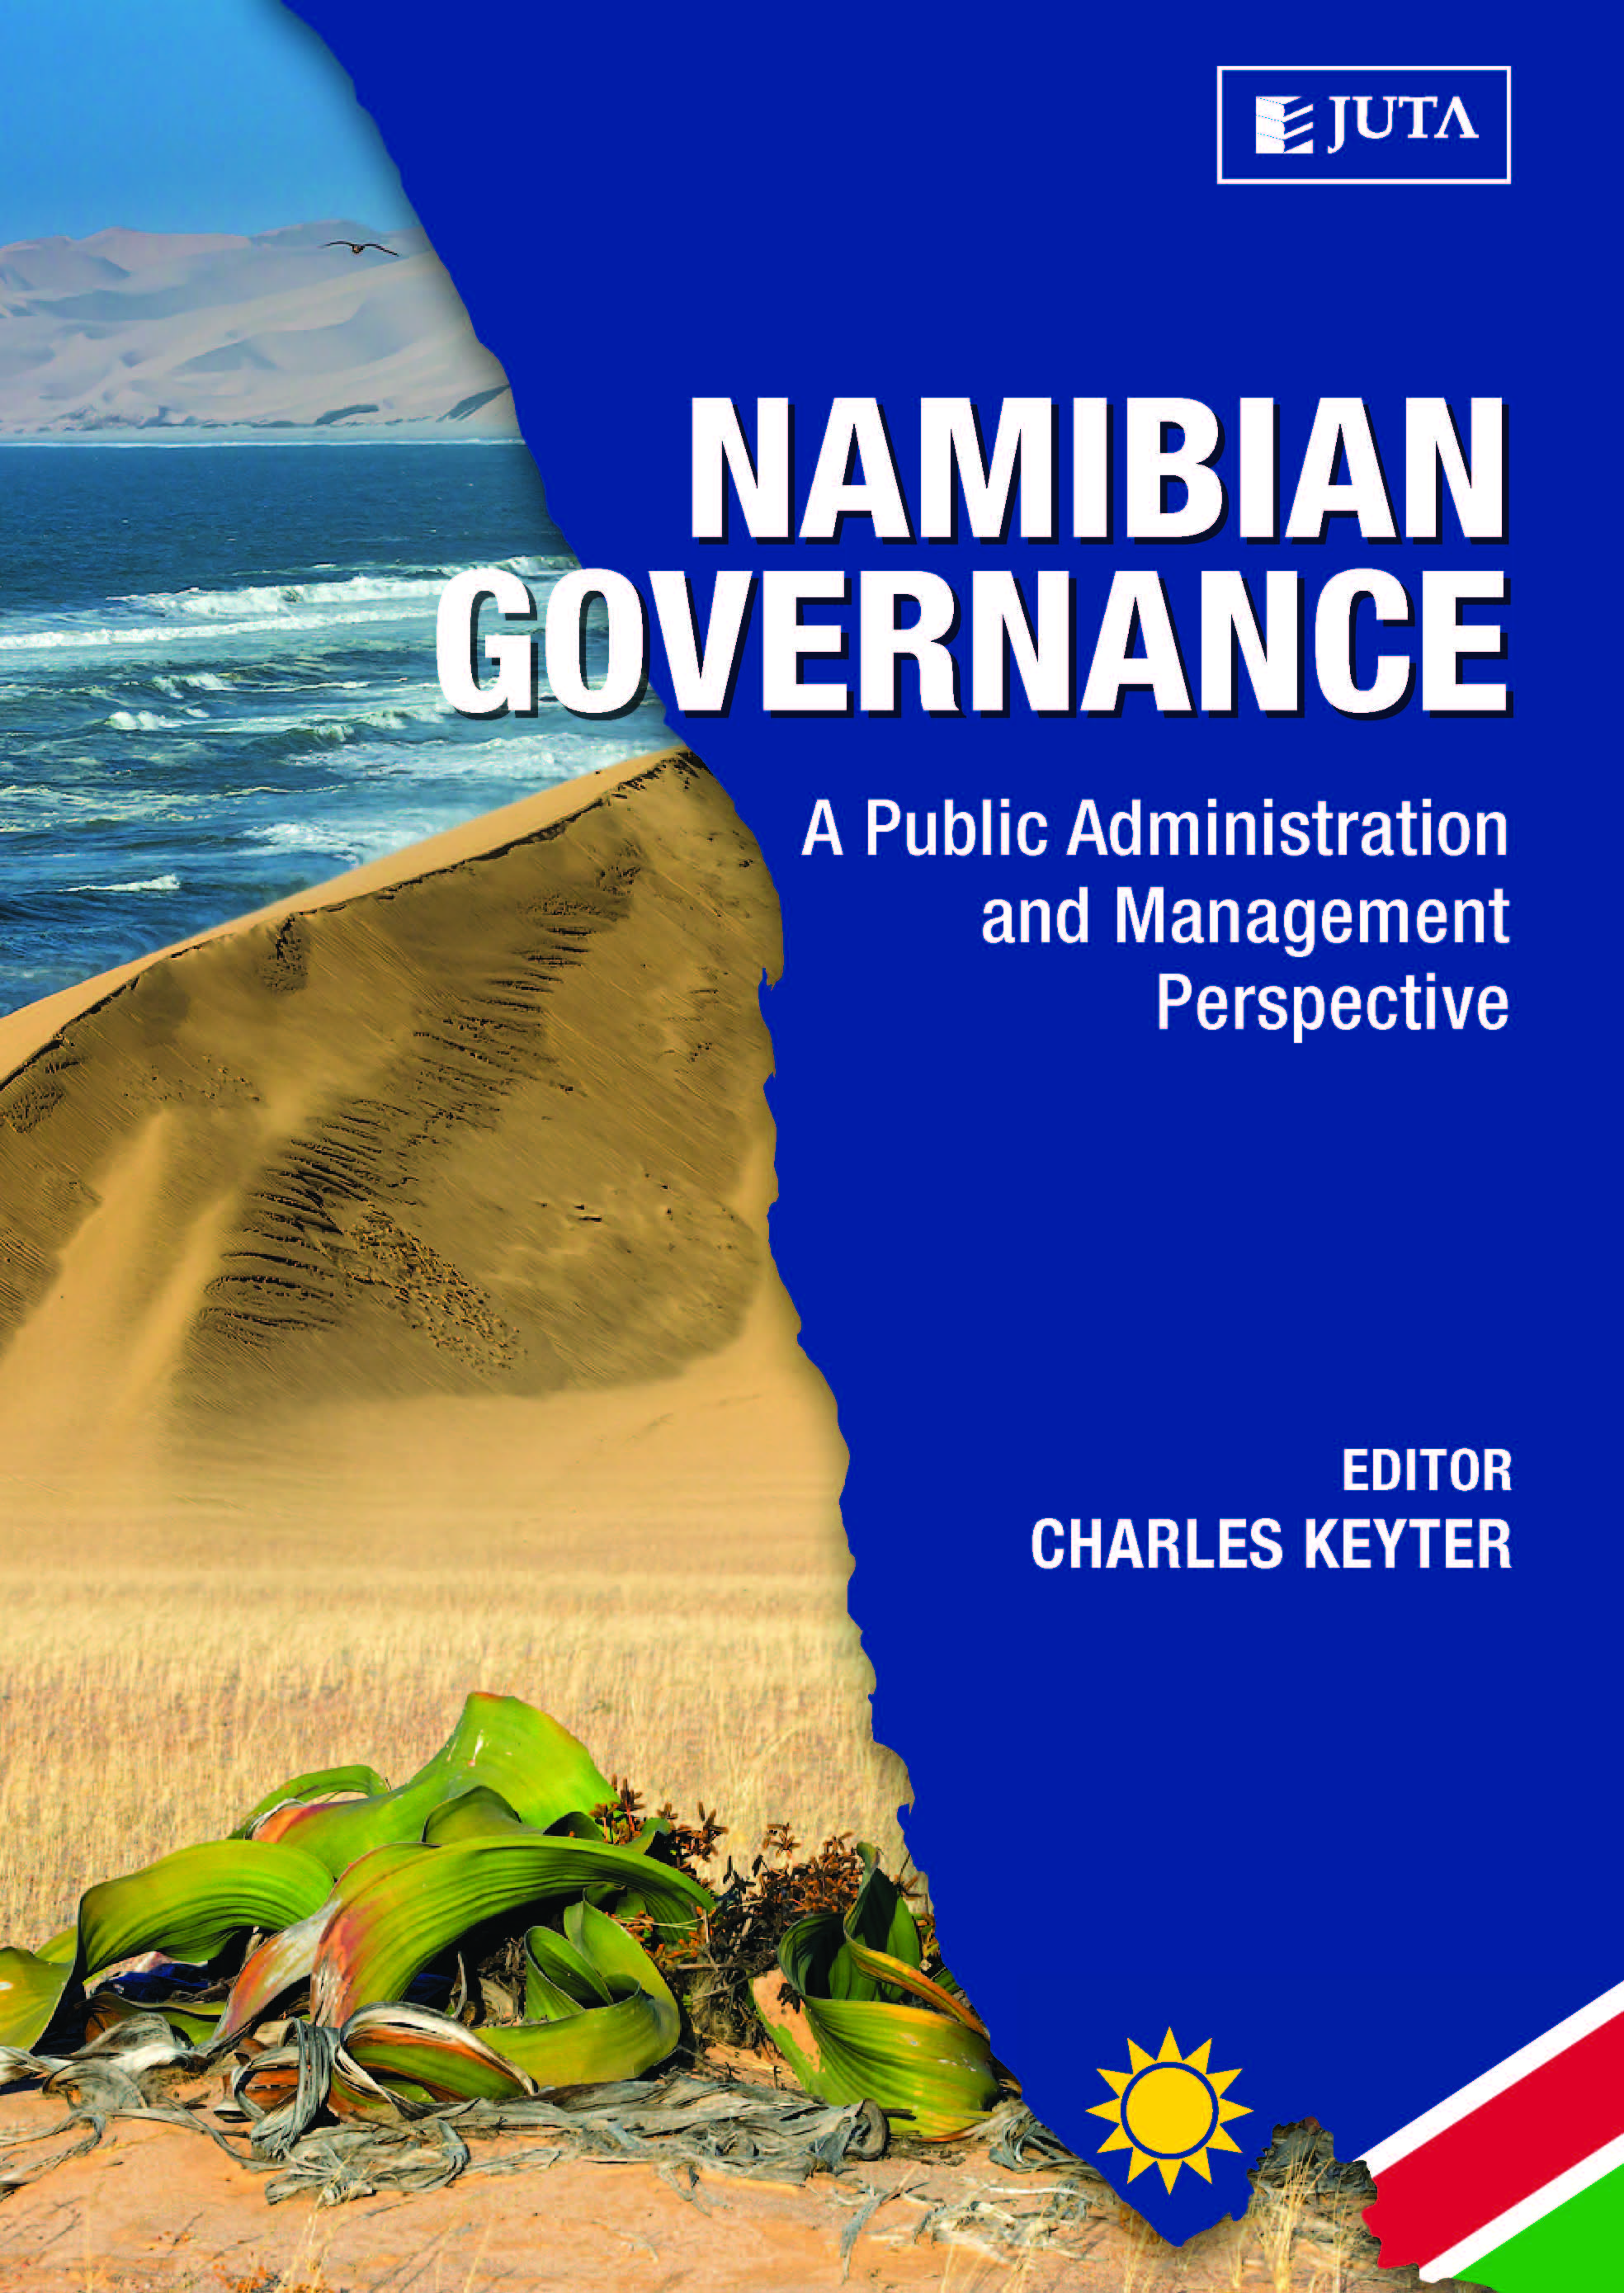 Namibian Governance: A Public Administration and Management Perspective